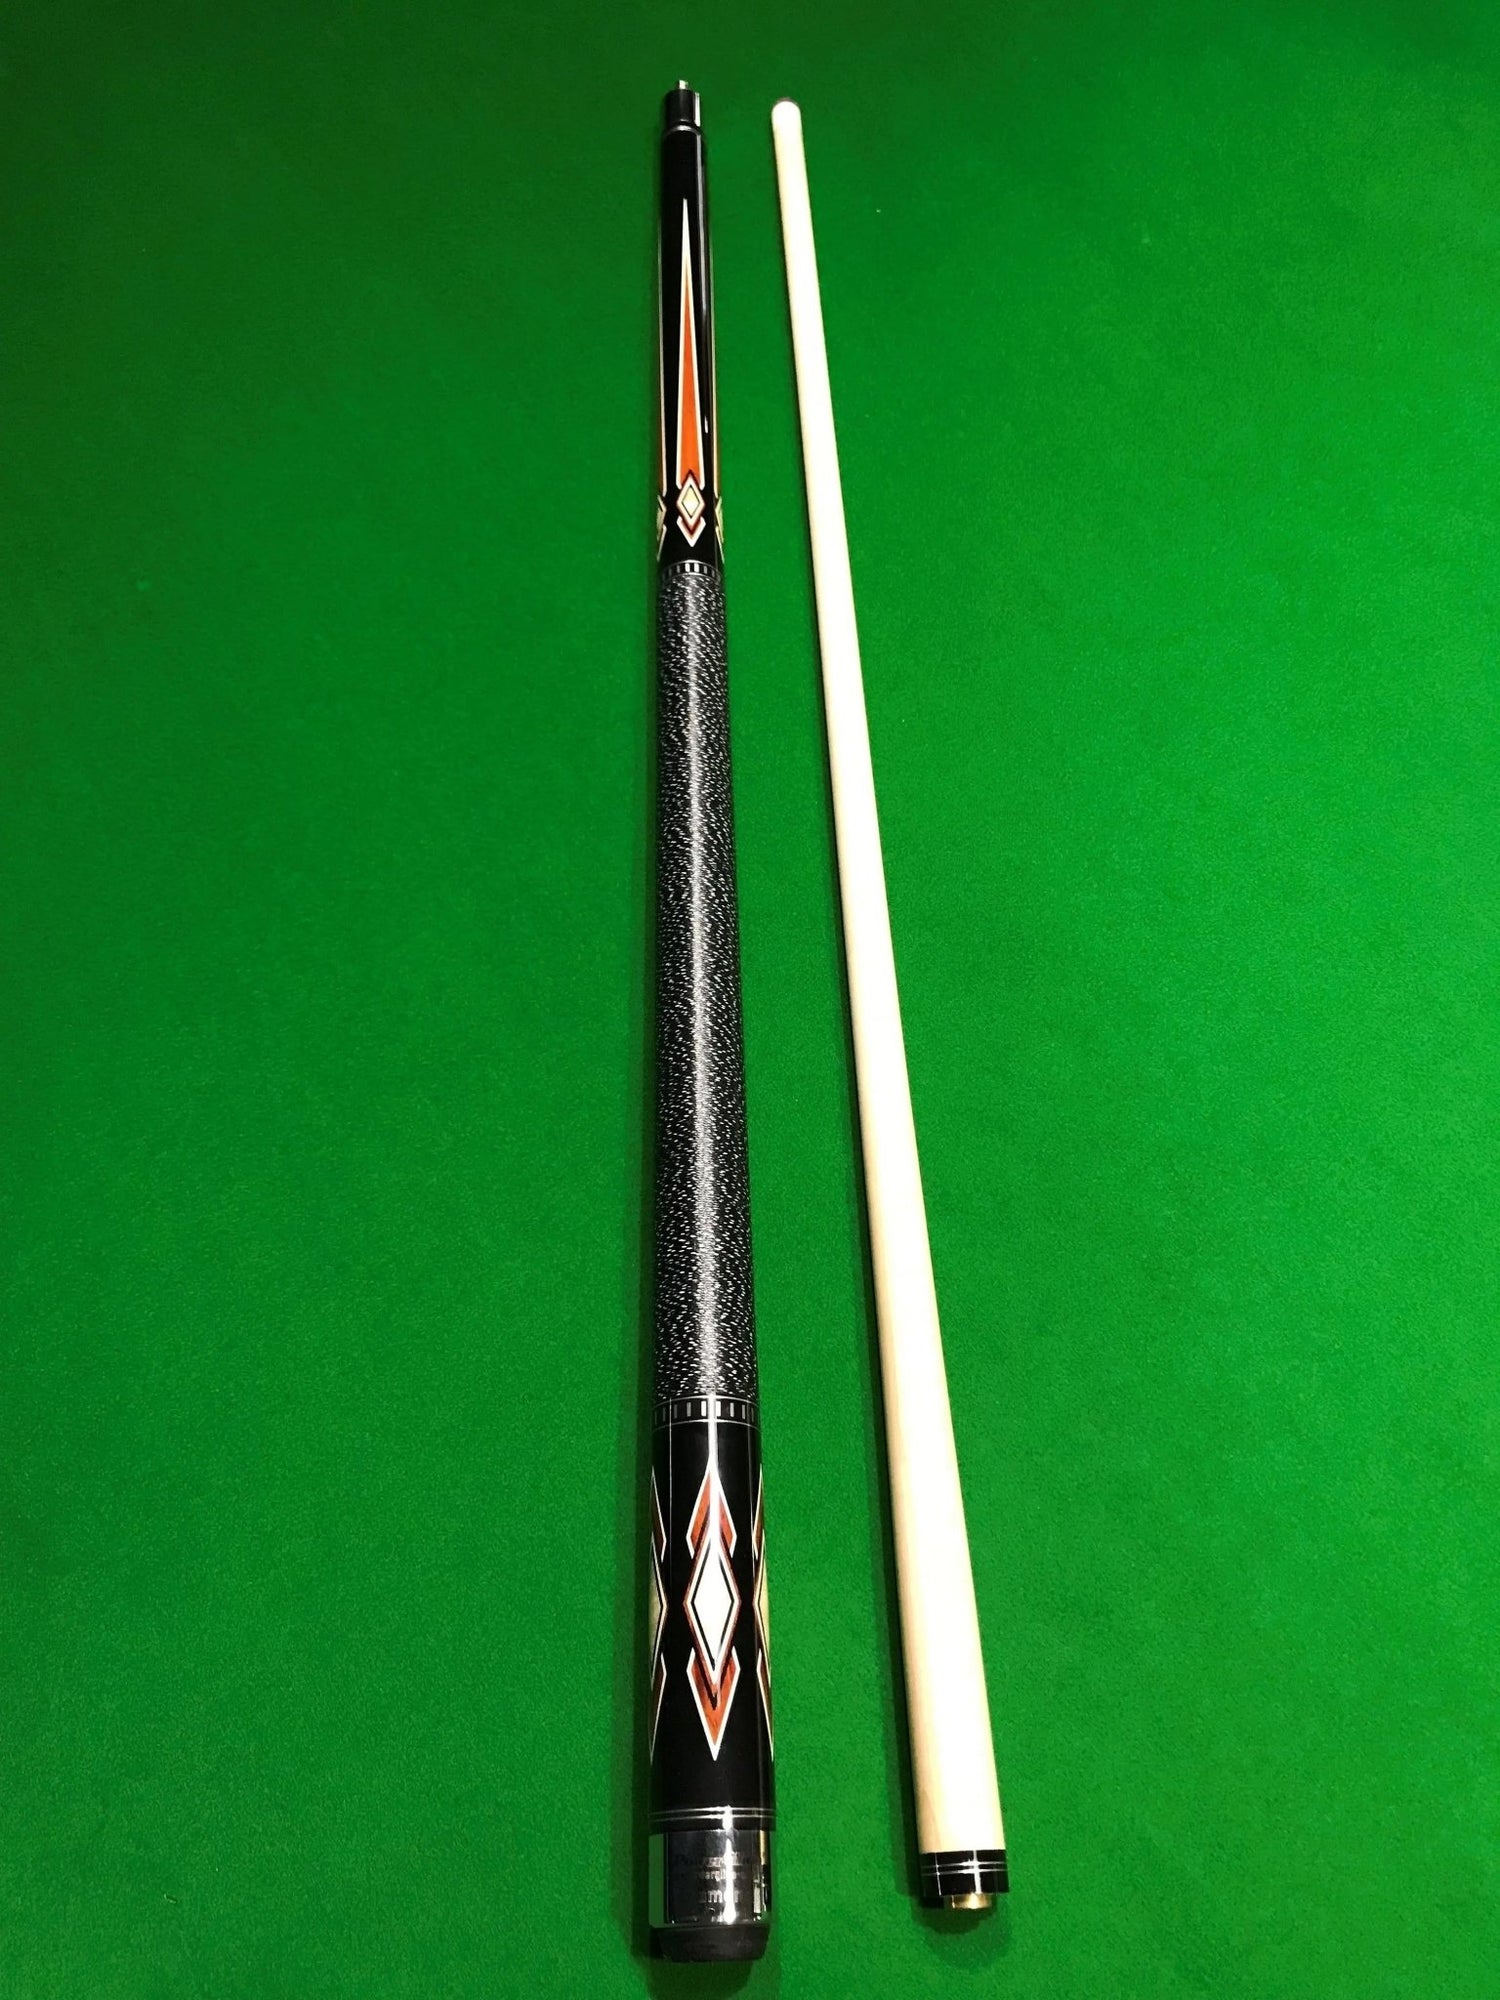 POWERGLIDE Canadian Maple 9Ball Pool Cues